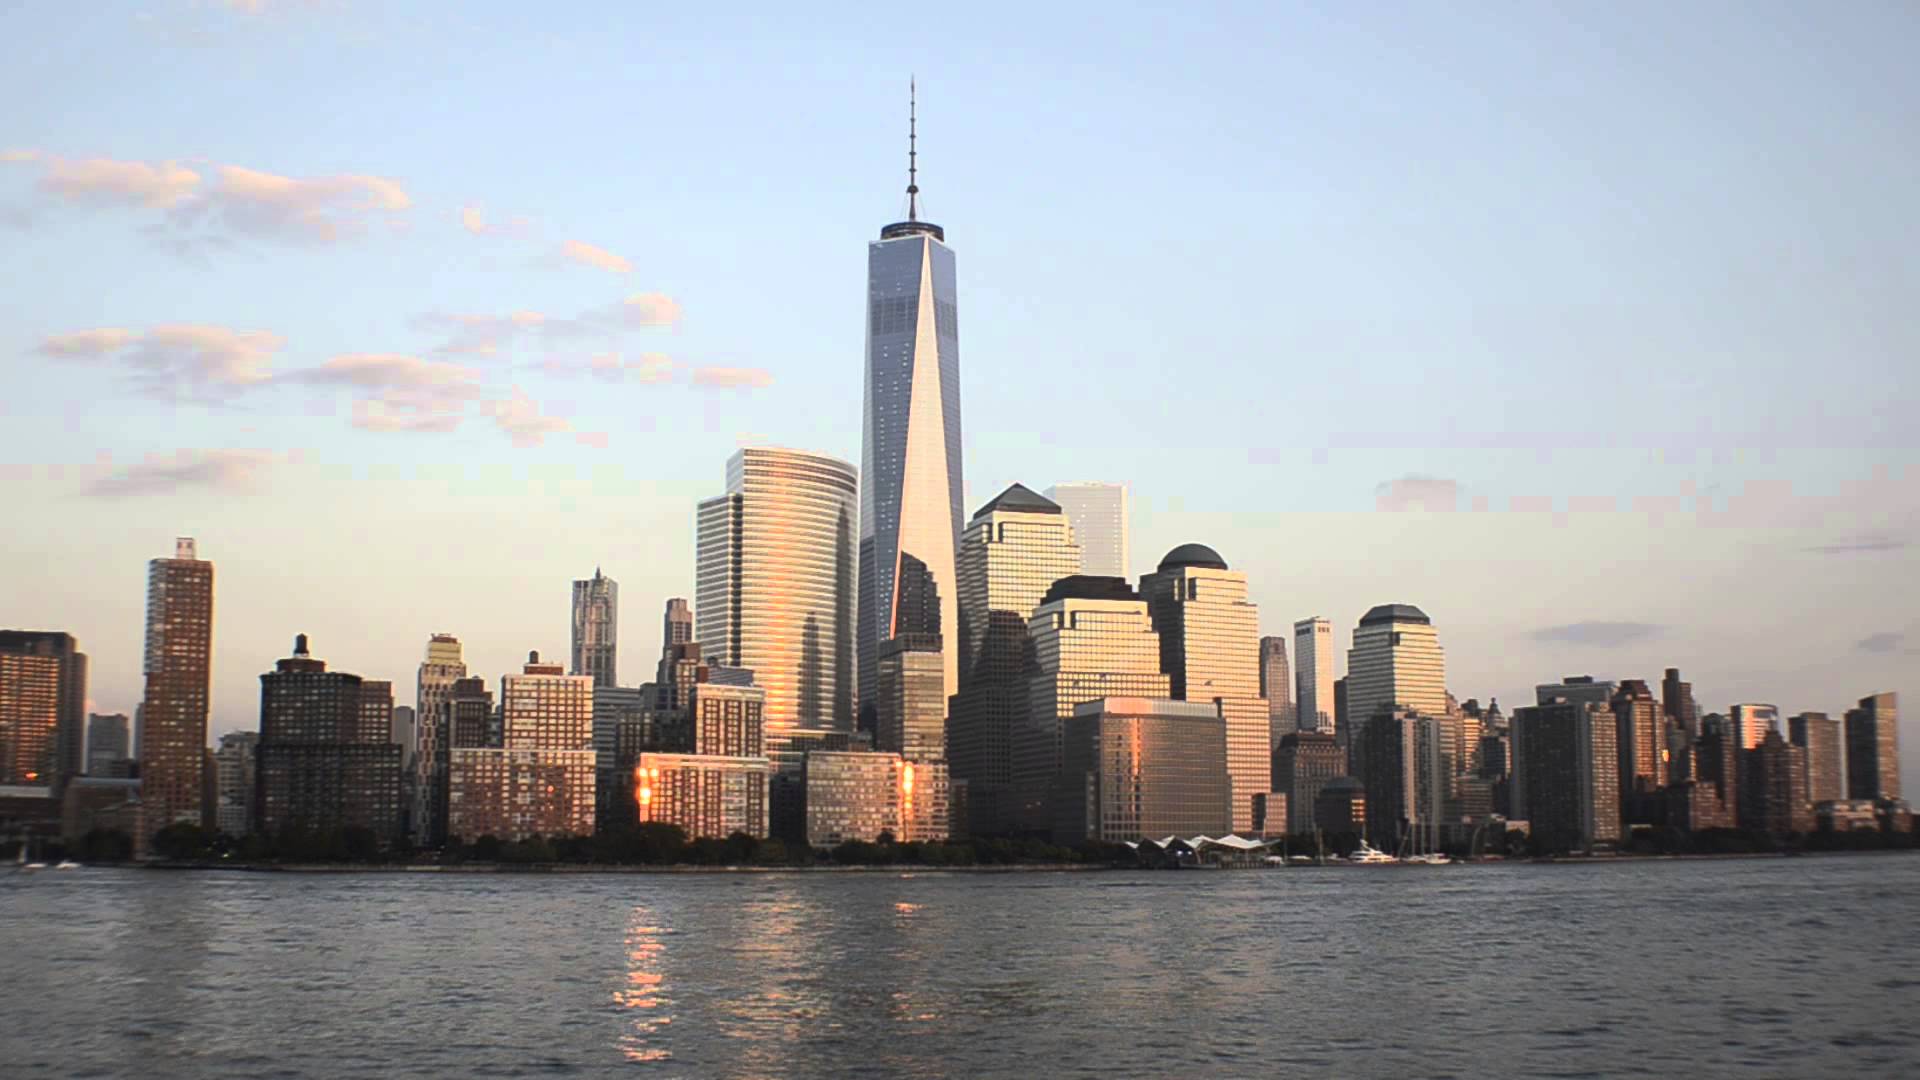 2004 - The cornerstone of the Freedom Tower is laid on the site of the World Trade Center in New York City.